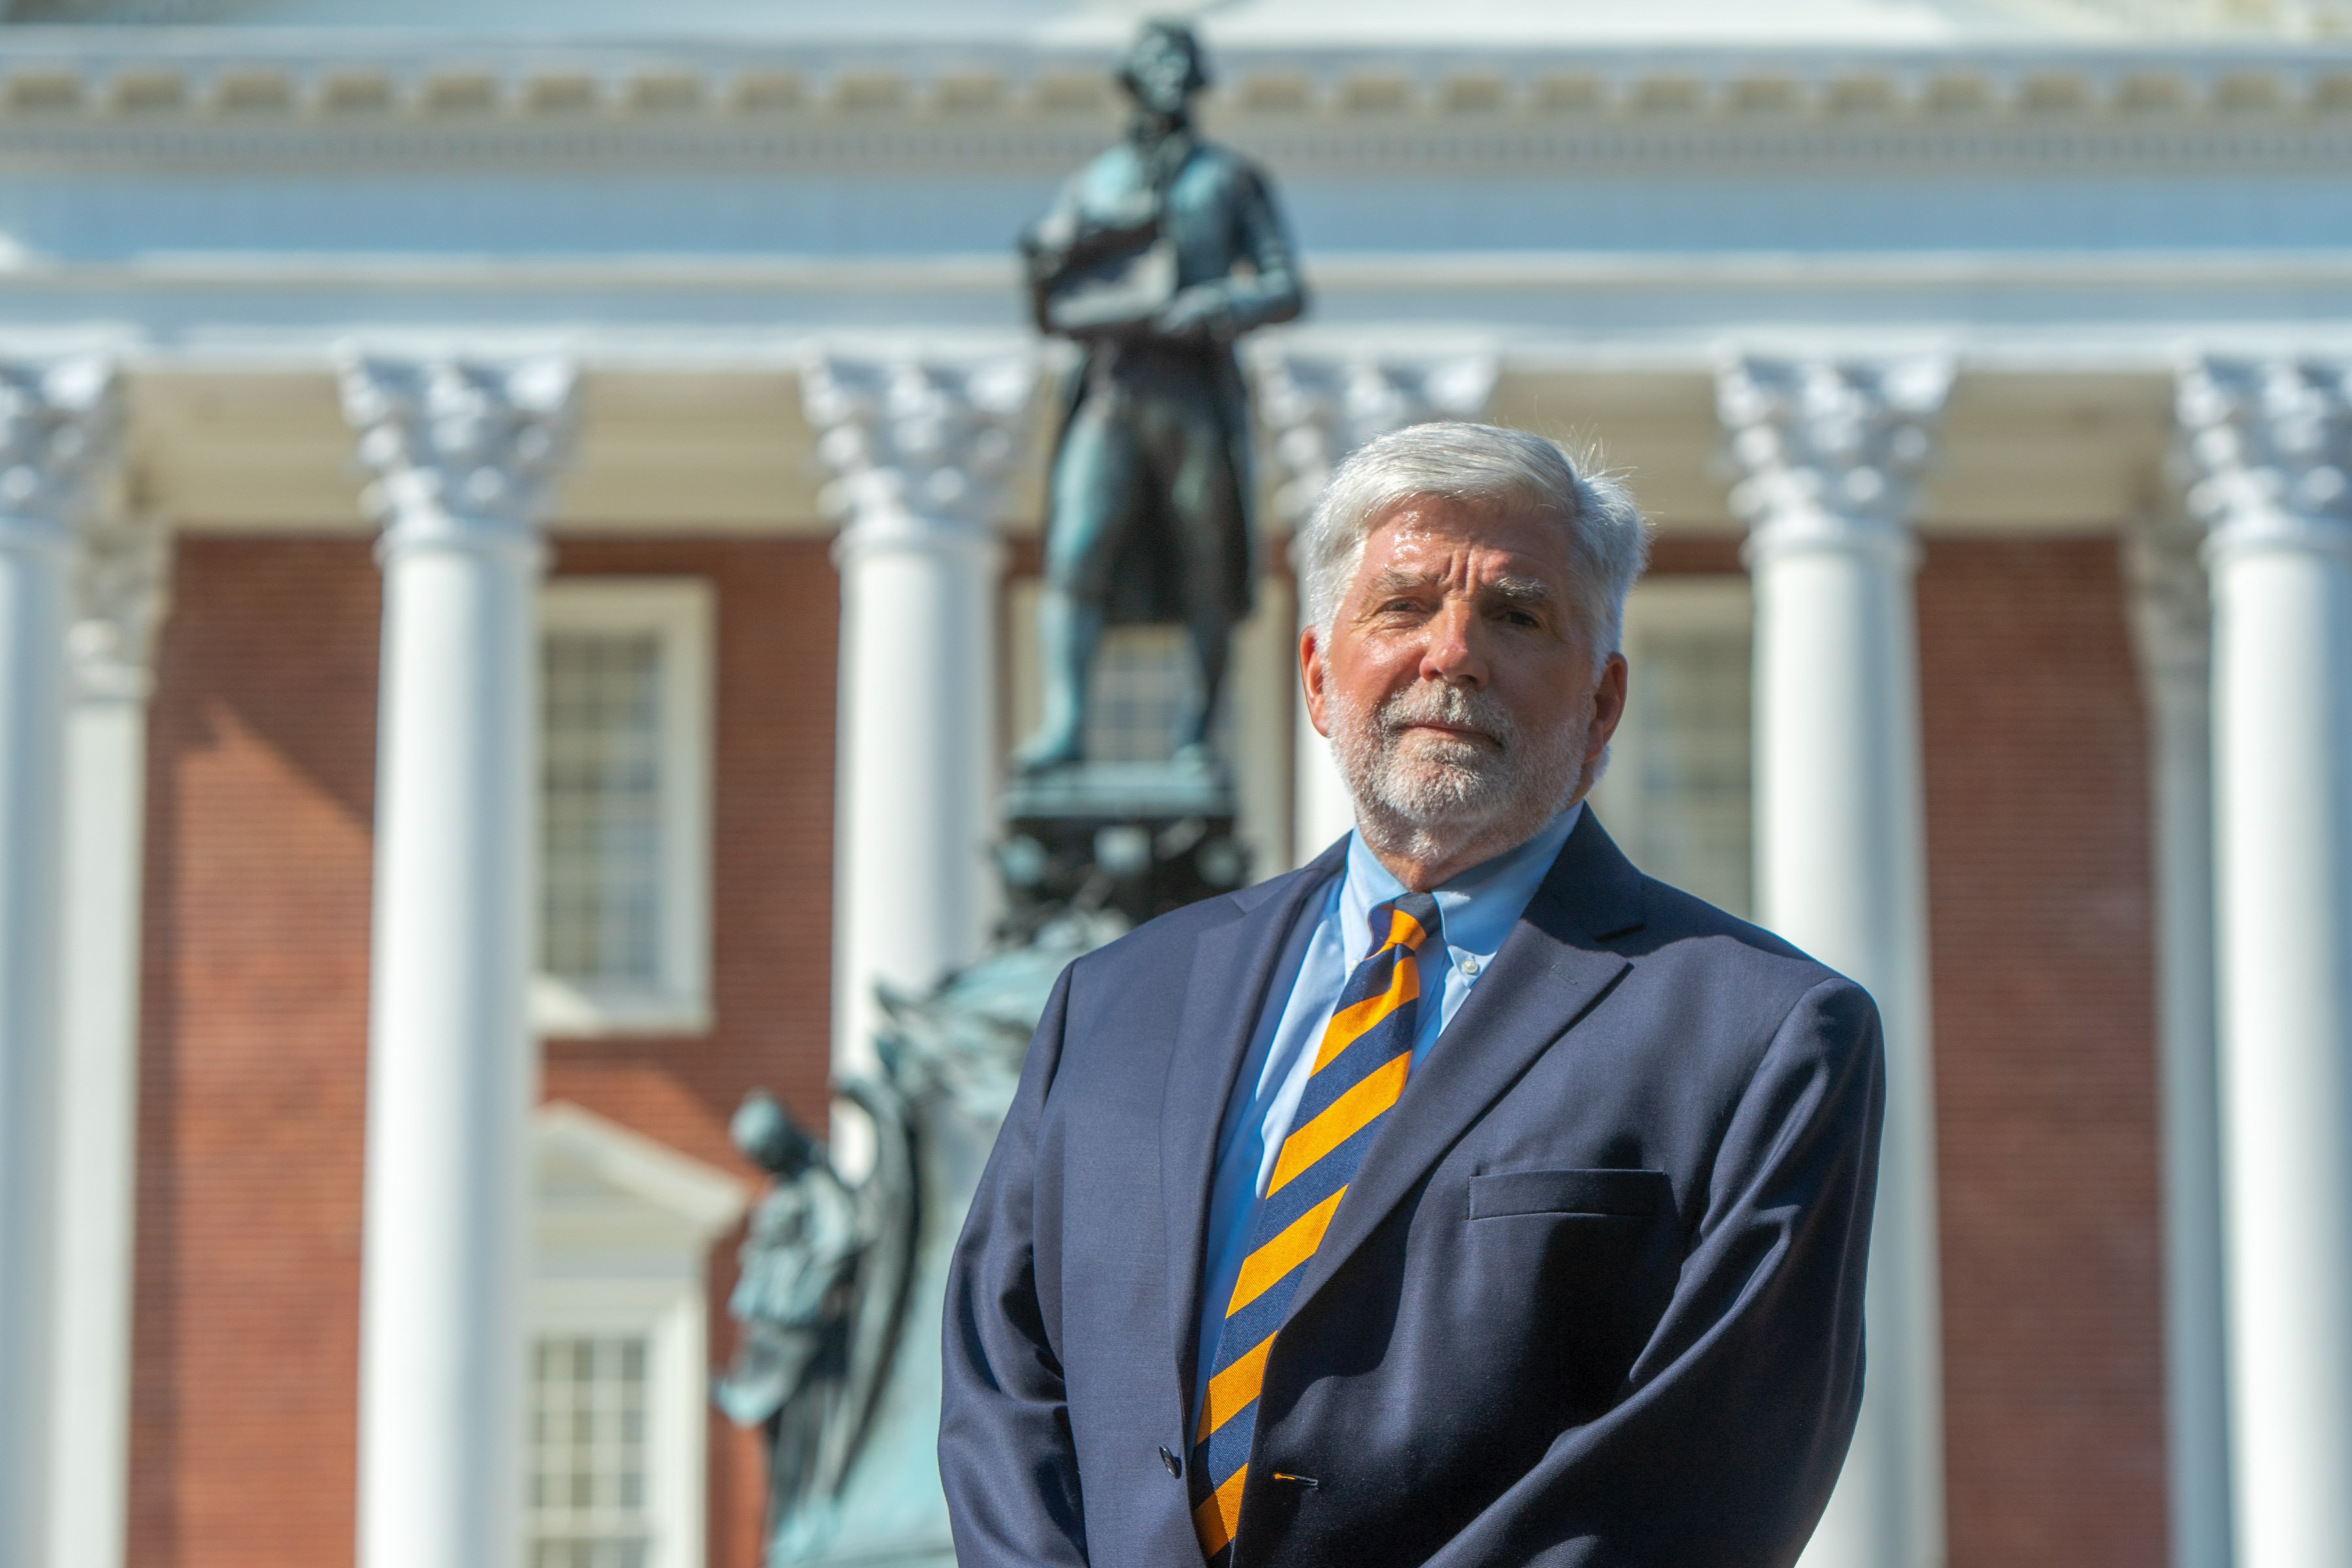 Bert Ellis, a white man wearing a suit and a tie in the blue and orange colors of the University of Virginia, stands in front of a statue of Thomas Jefferson.